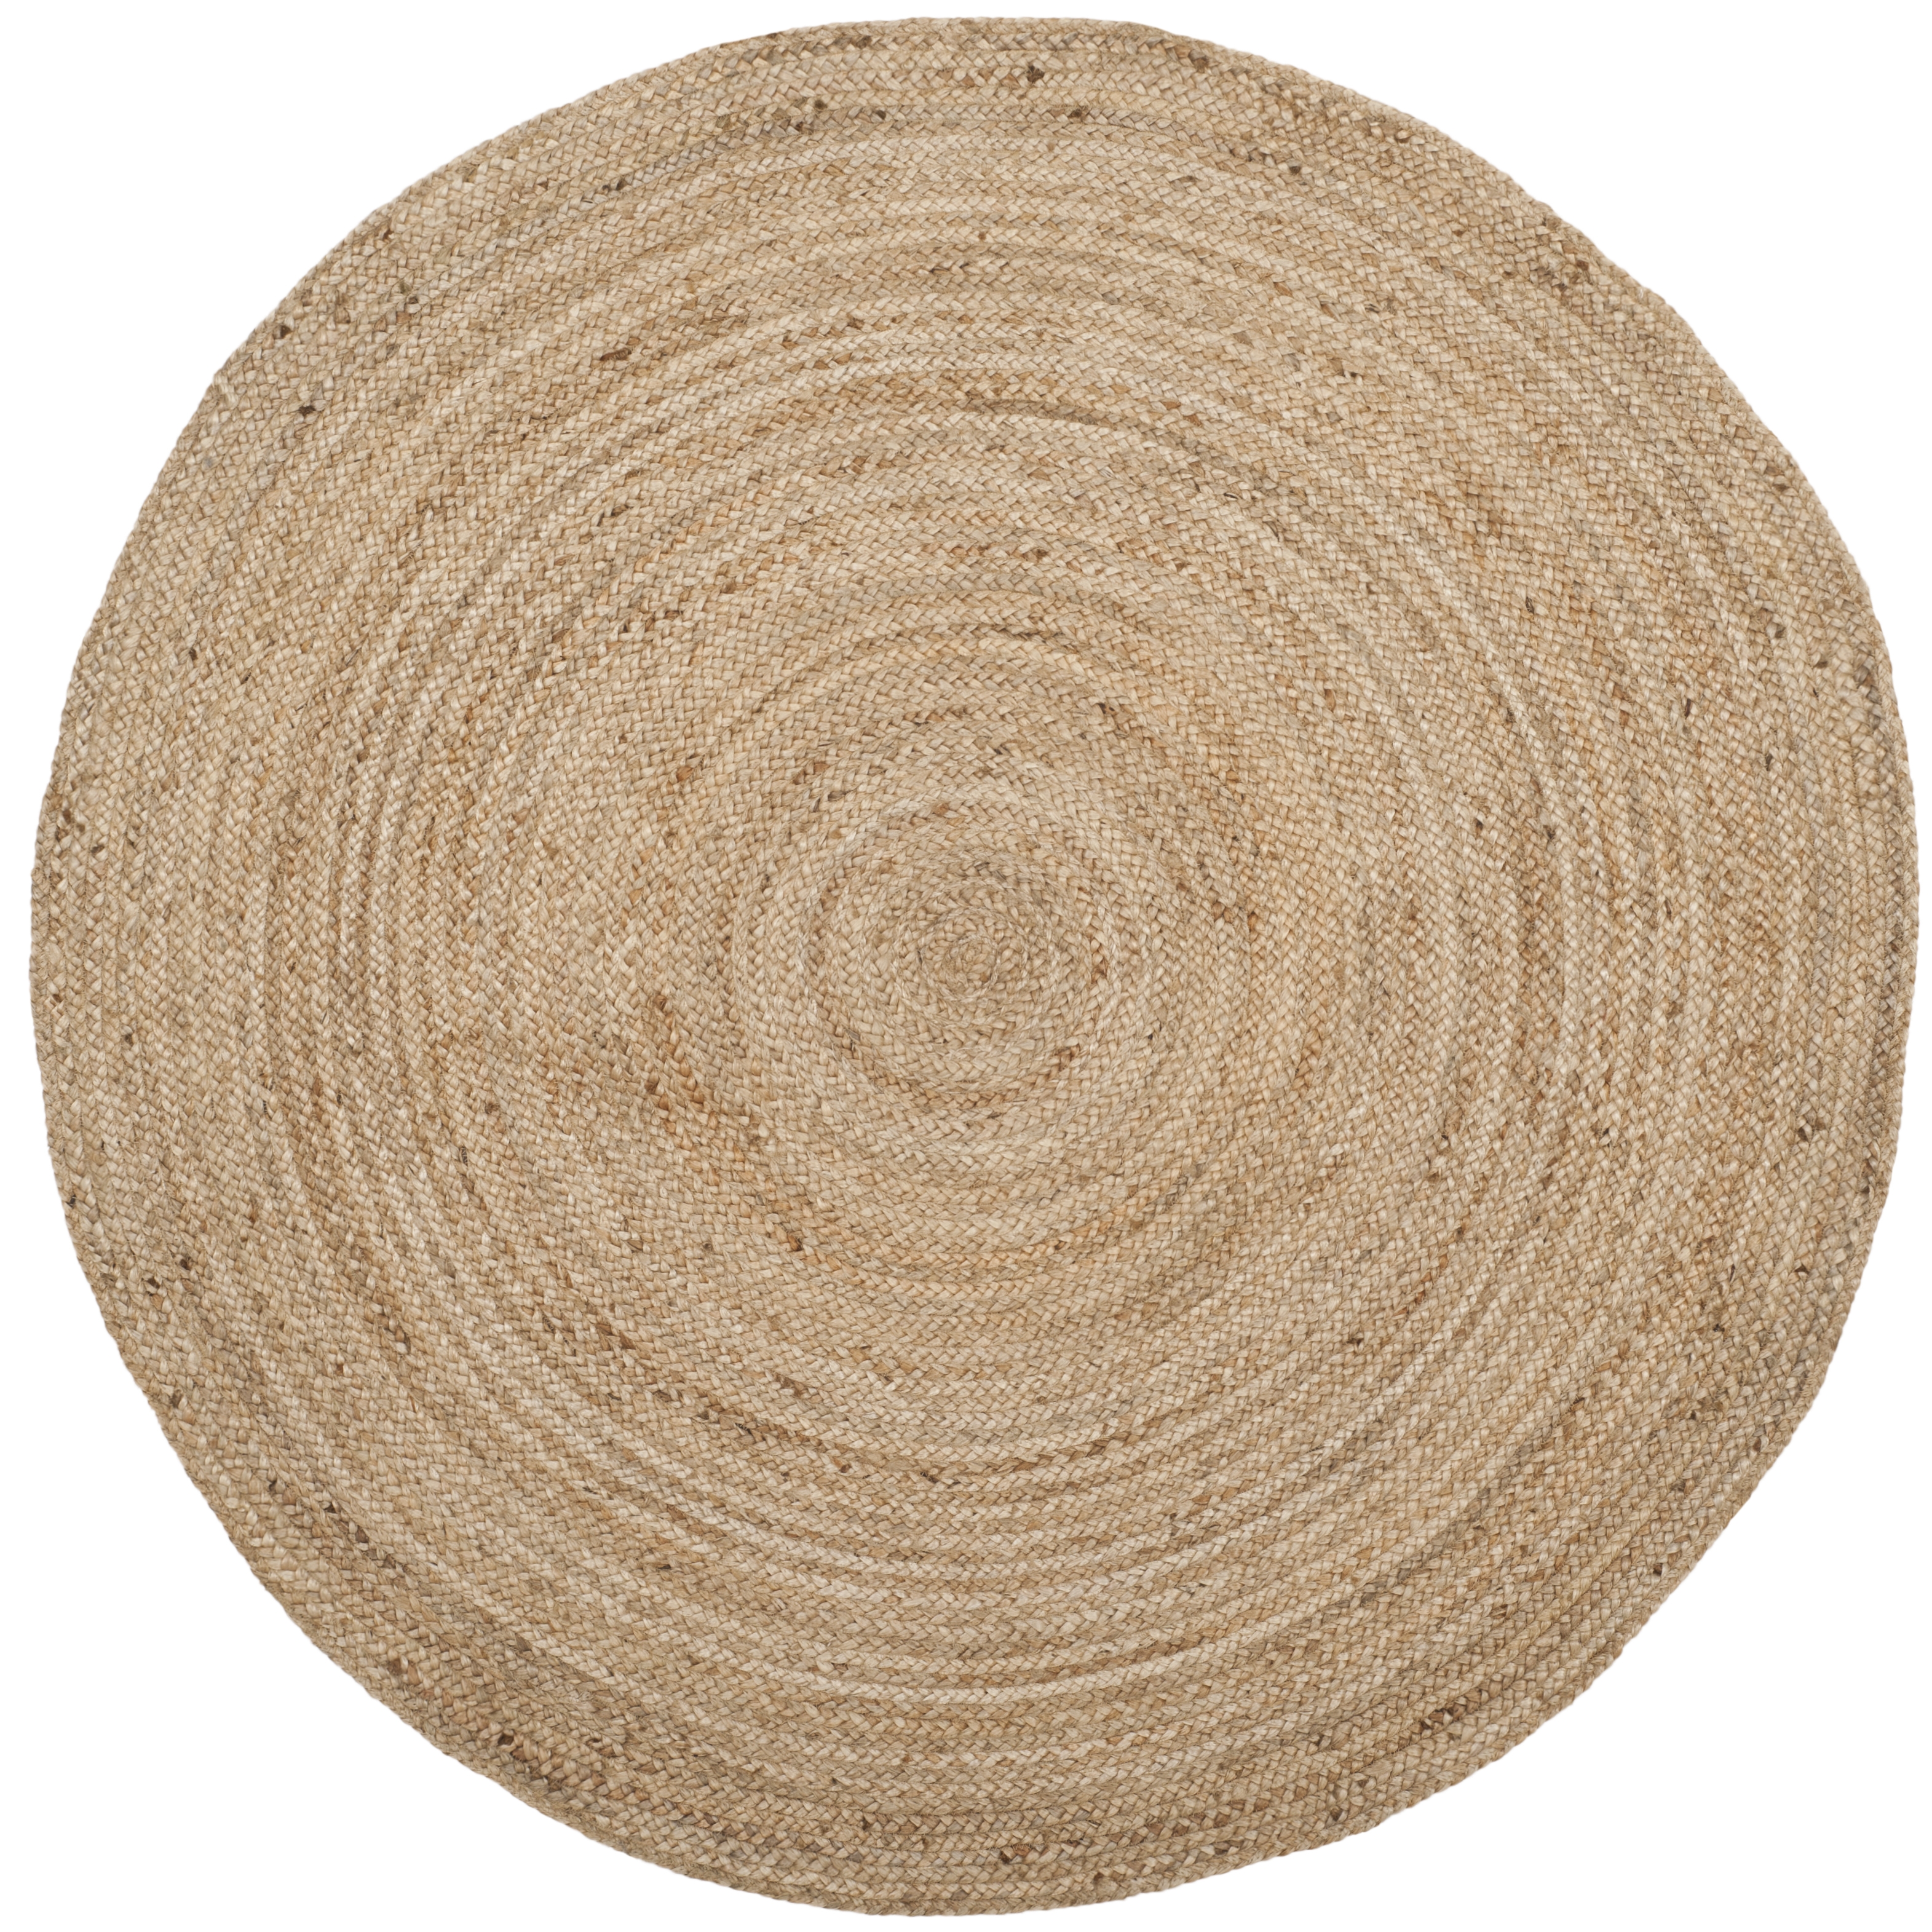 Arlo Home Hand Woven Area Rug, NF801N, Natural/Natural,  8' X 8' Round - Image 0